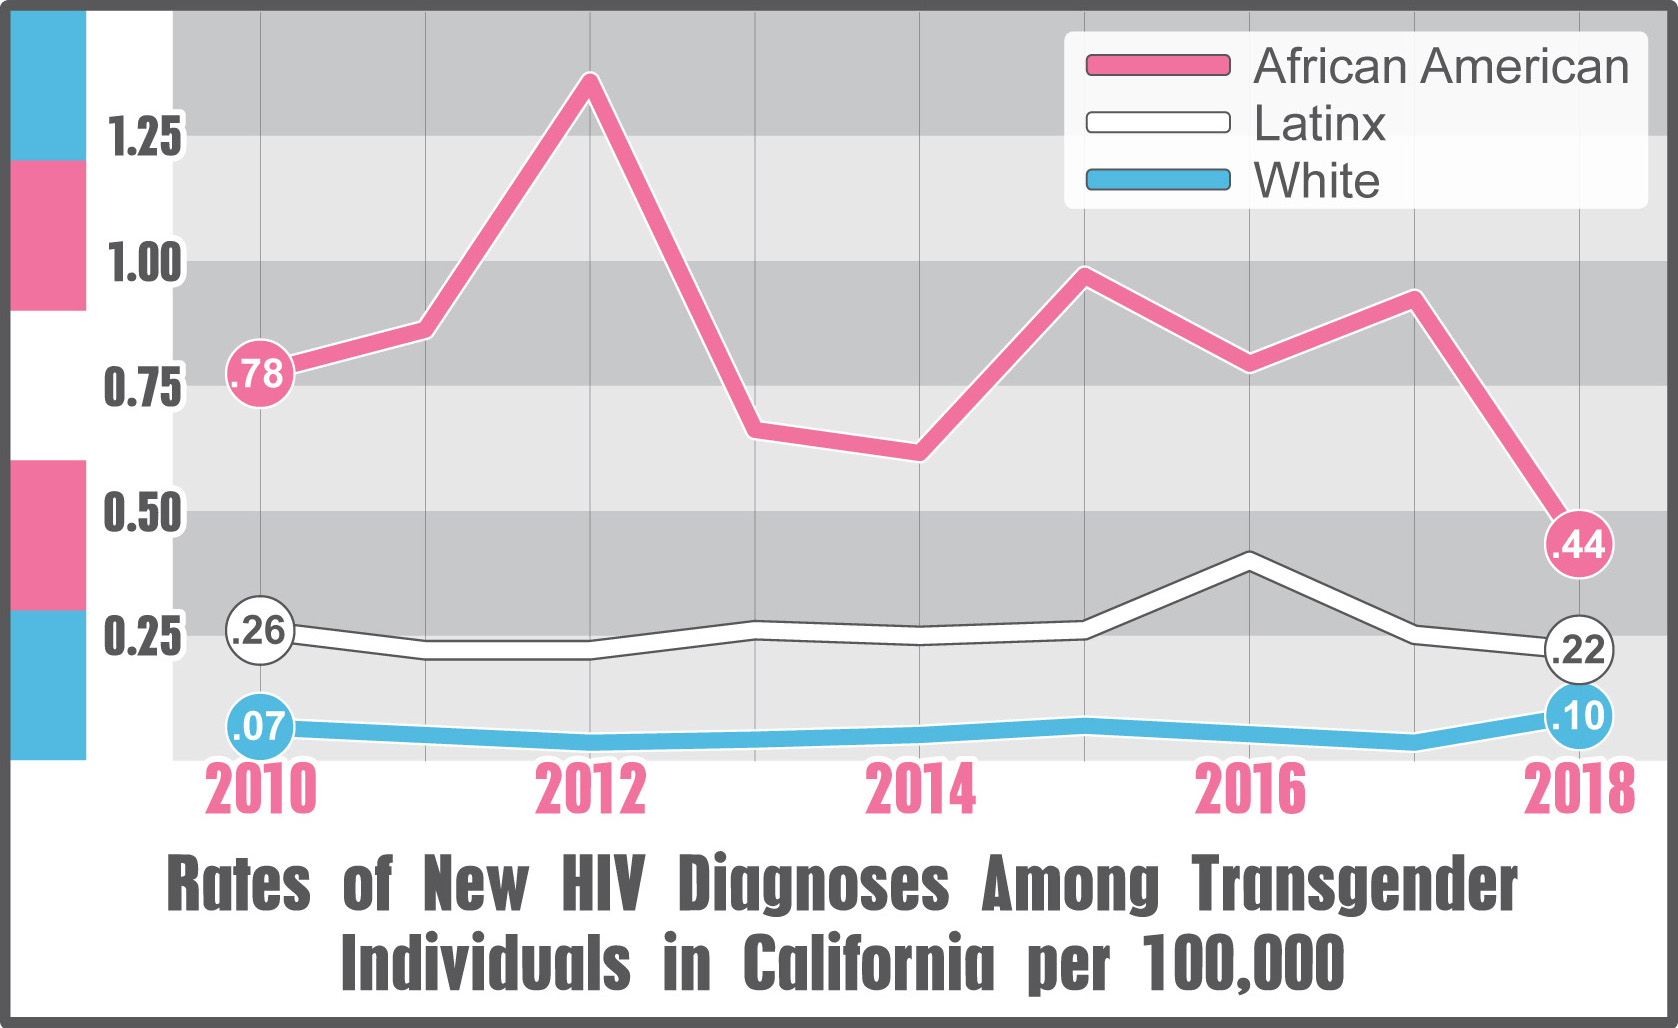 ThisGraph displaying rates of New HIV Diagnoses Among Transgender Individuals in California per 100,000 from 2010 to 2018